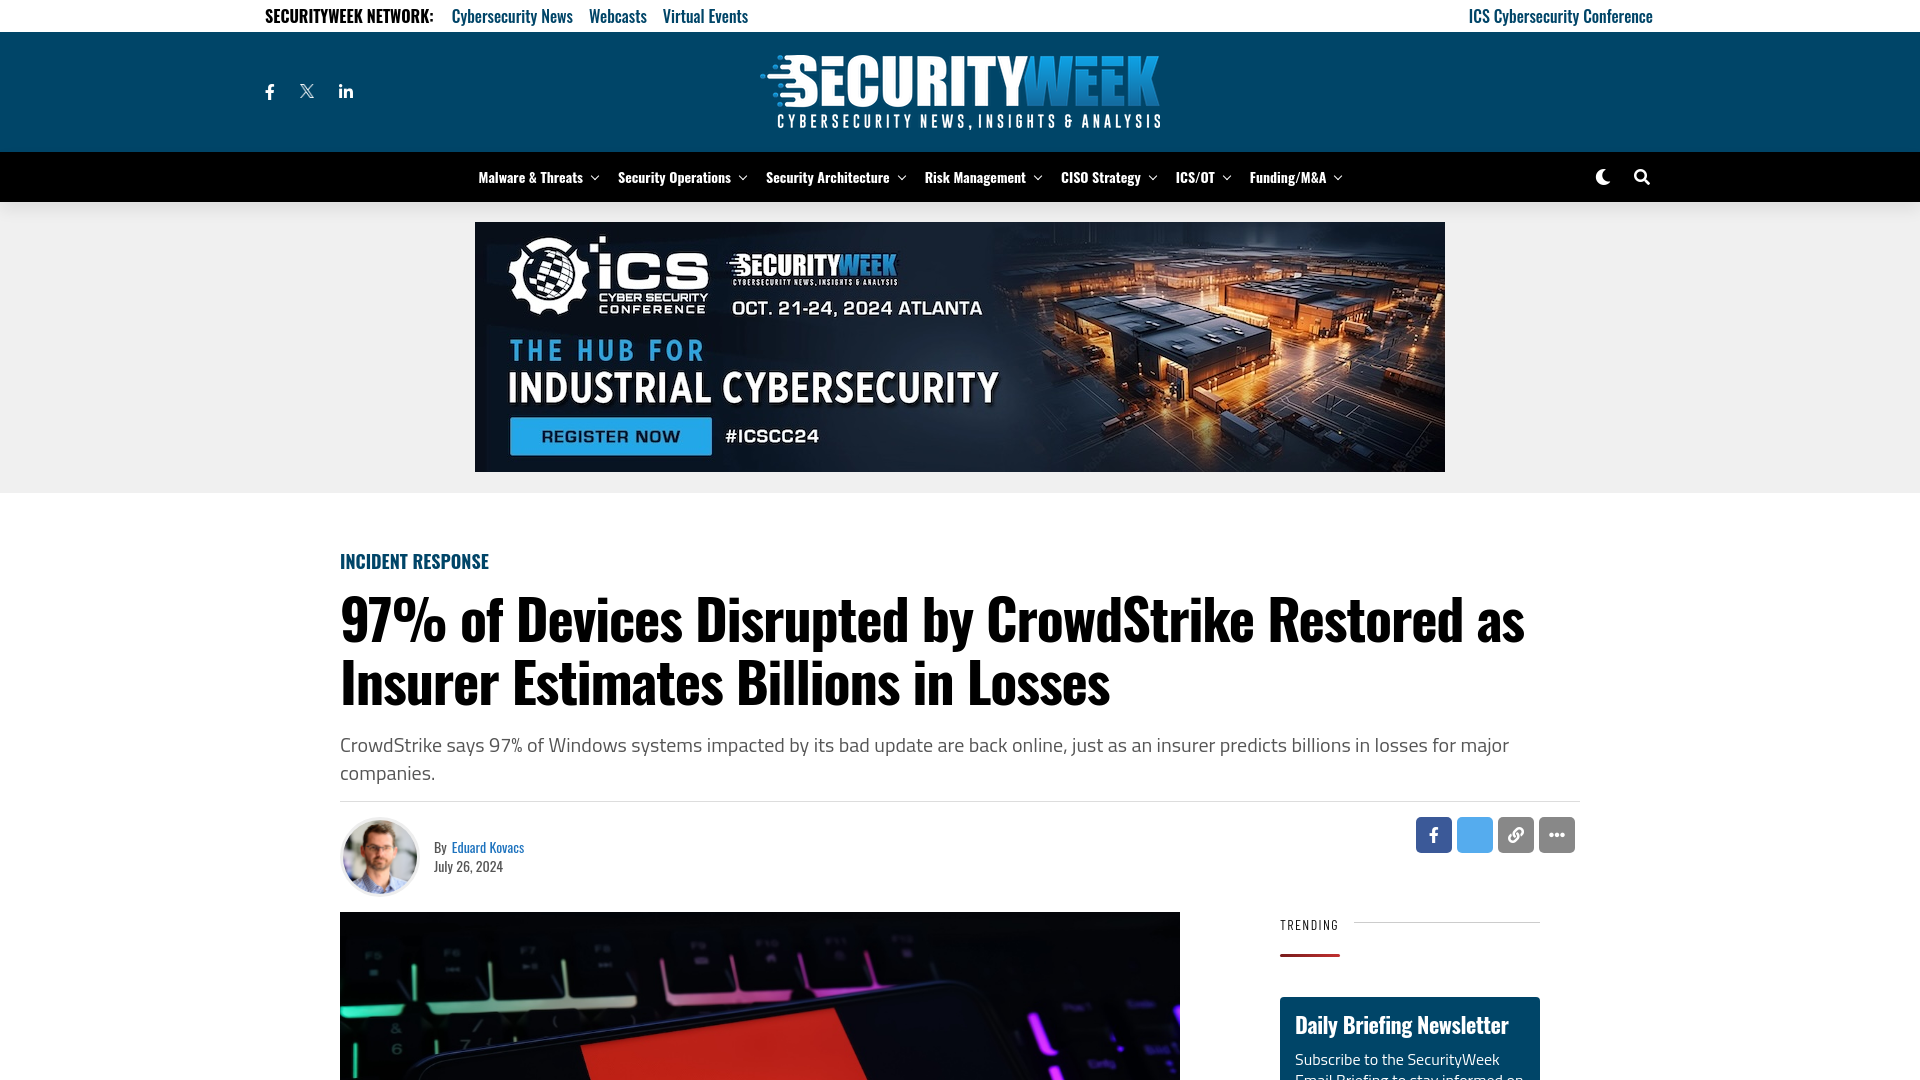 97% of Devices Disrupted by CrowdStrike Restored as Insurer Estimates Billions in Losses - SecurityWeek